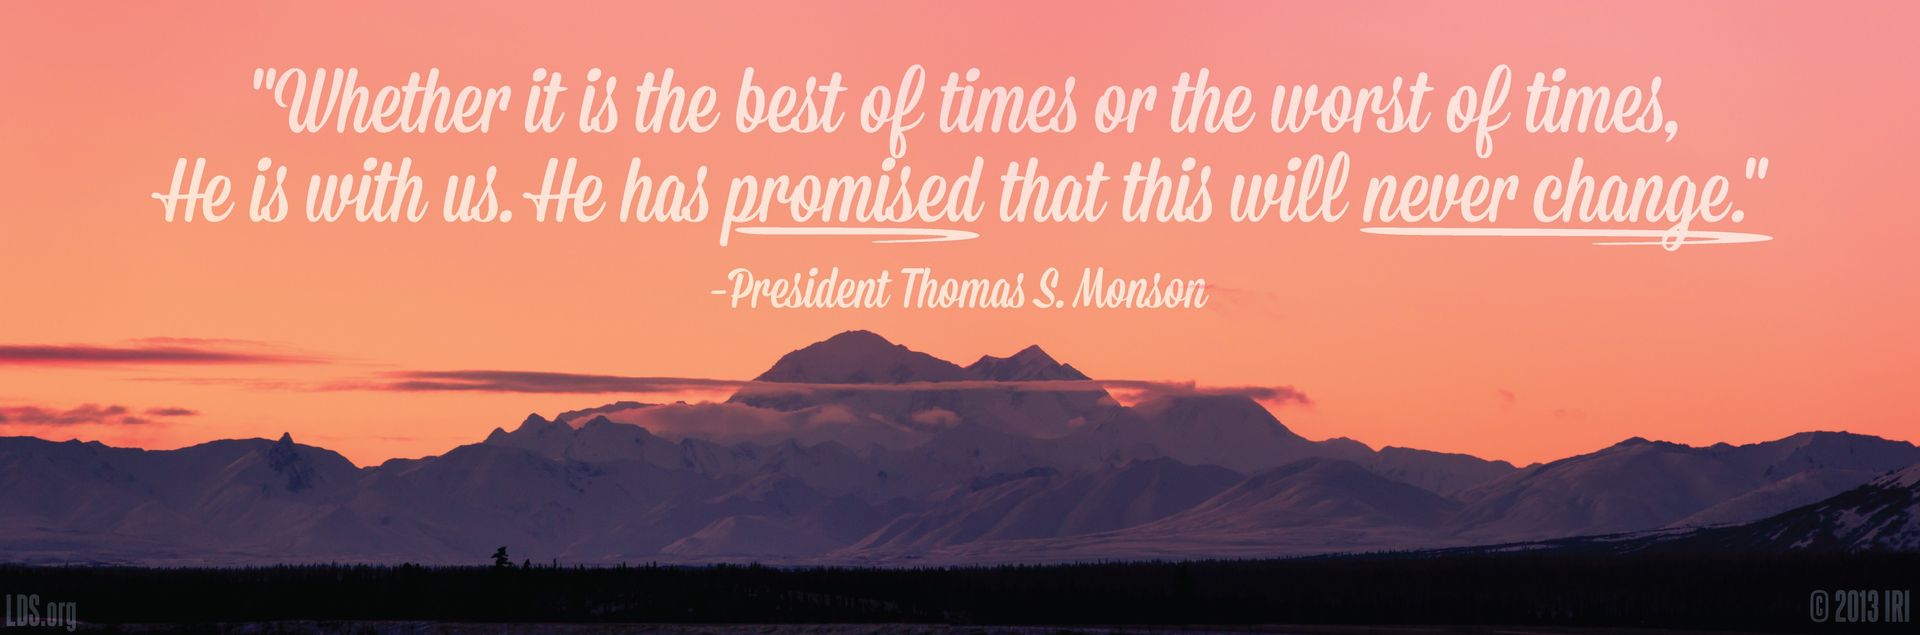 “Whether it is the best of times or the worst of times, He is with us. He has promised that this will never change.”—President Thomas S. Monson, “I Will Not Fail Thee, nor Forsake Thee” © undefined ipCode 1.